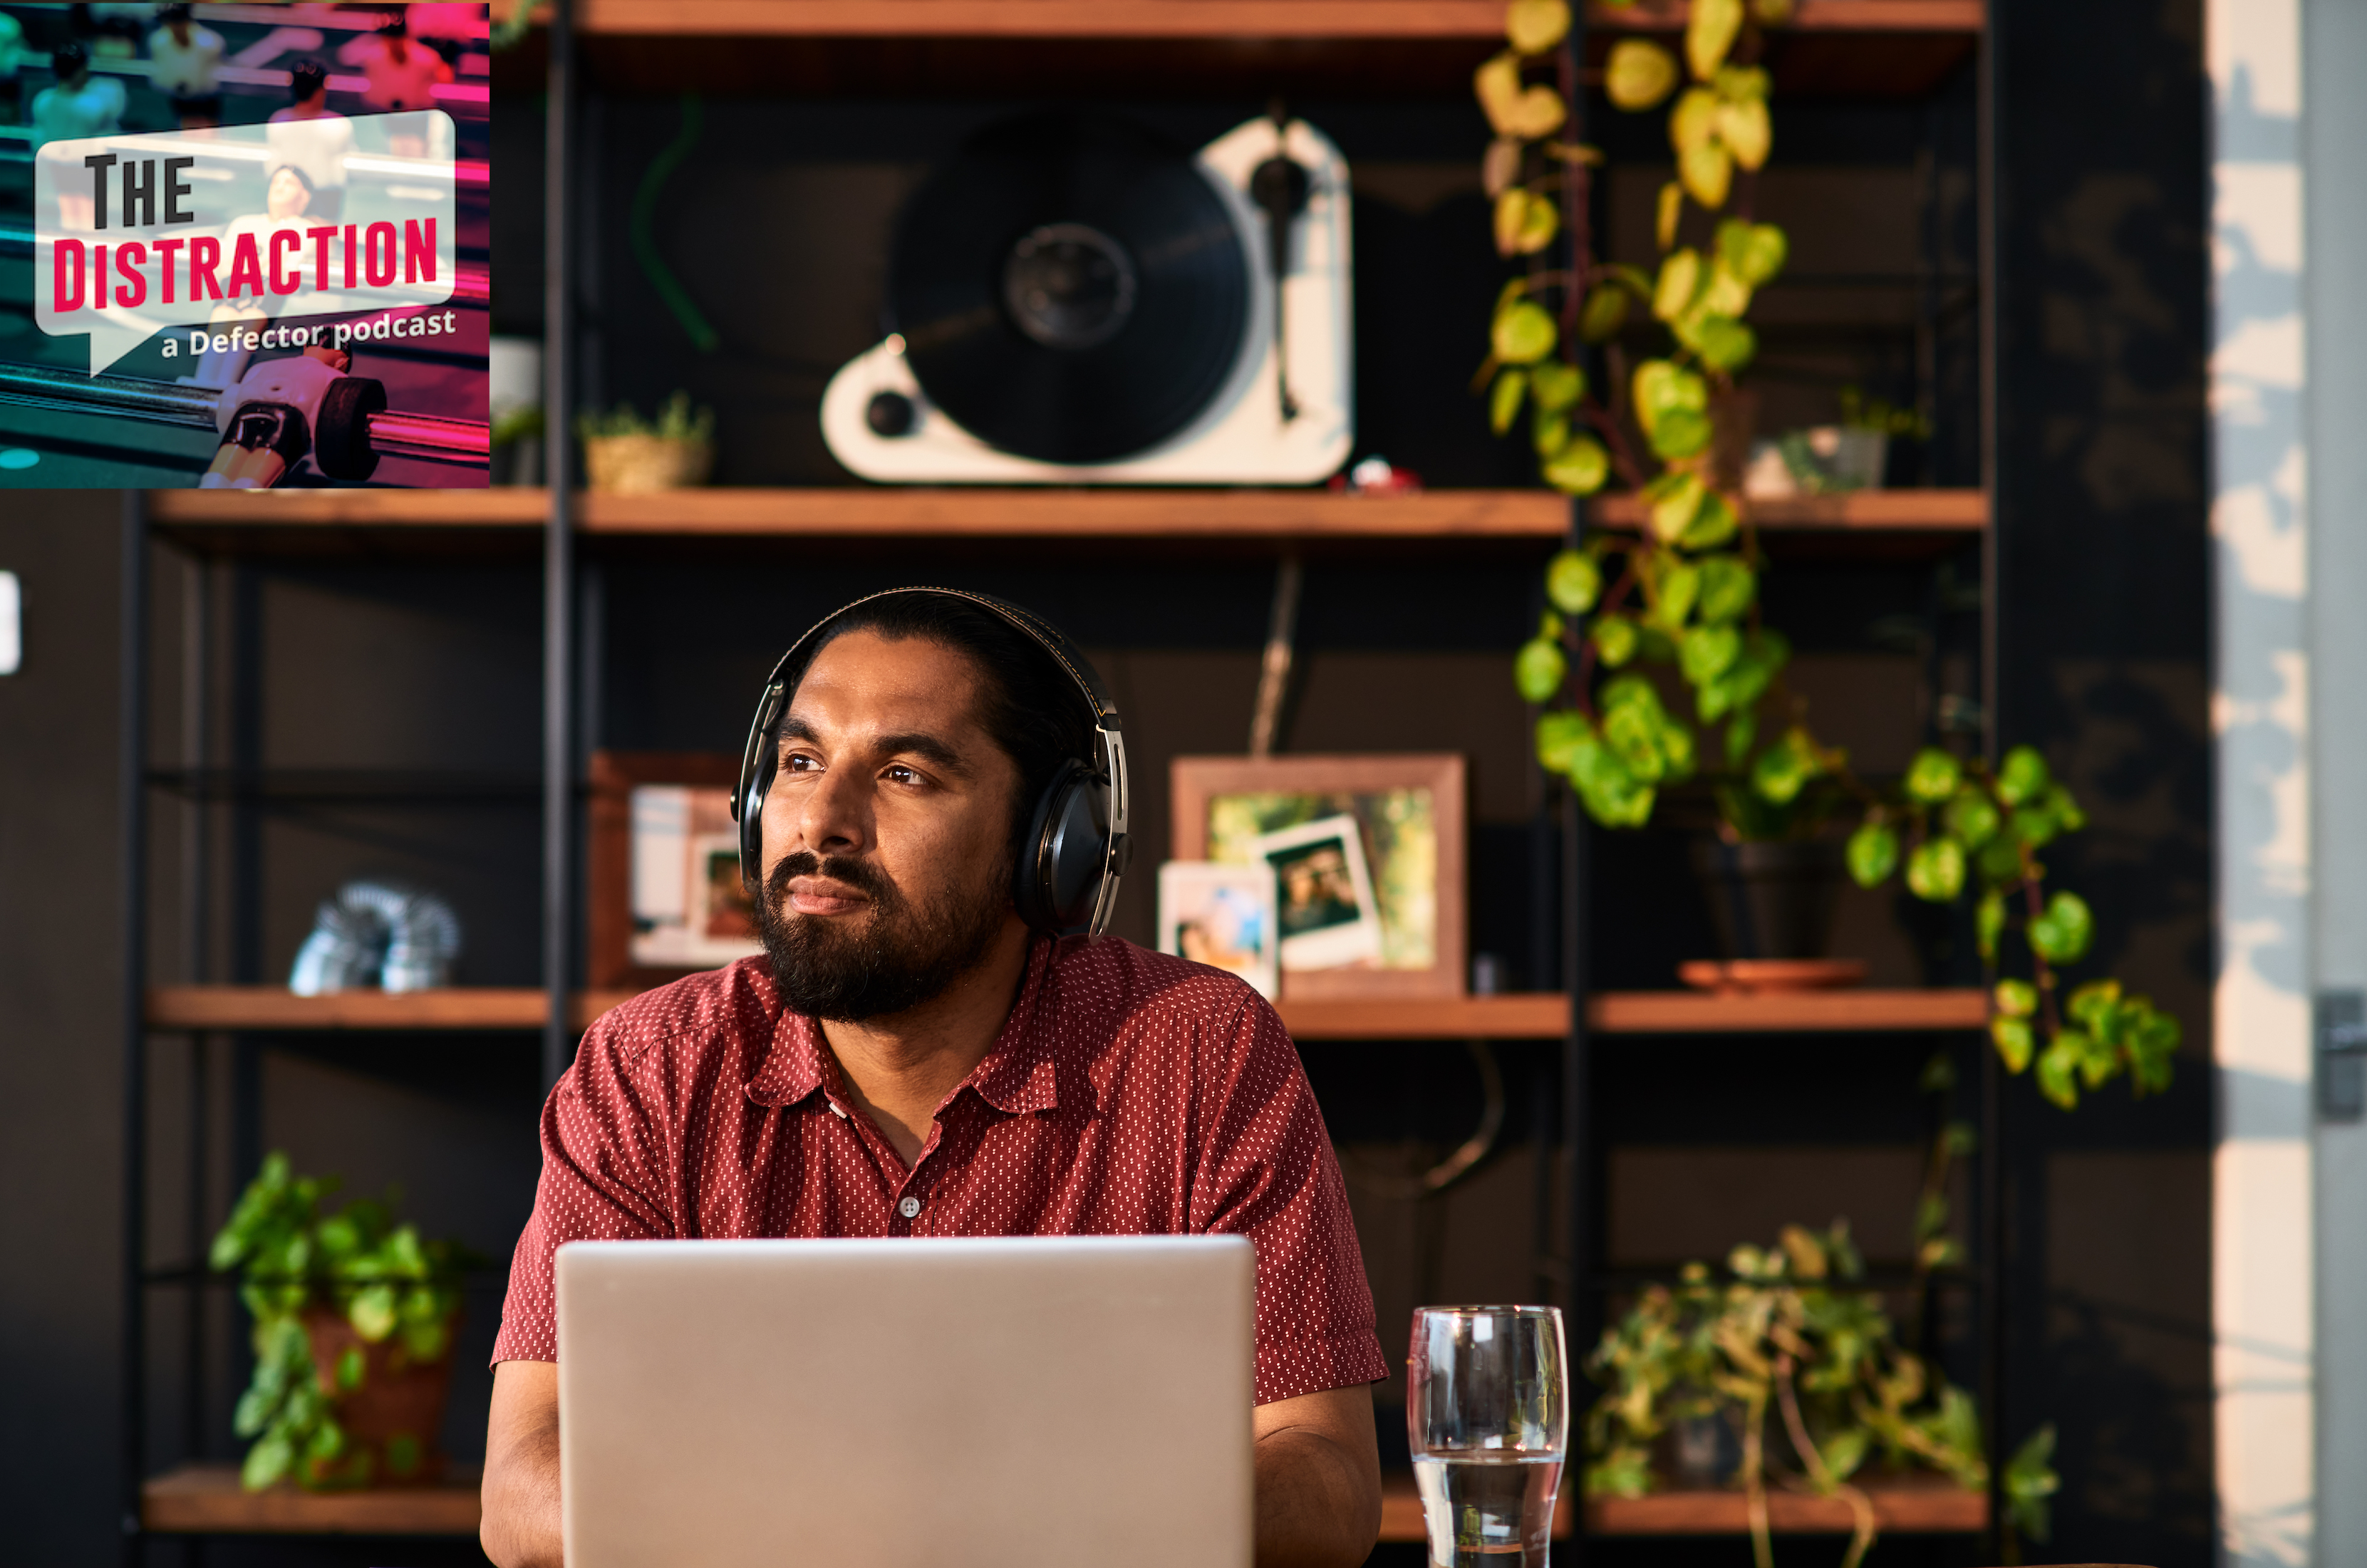 A stock photo of a man in his thirties sitting at a computer with headphones on, presumably thinking about podcasts.